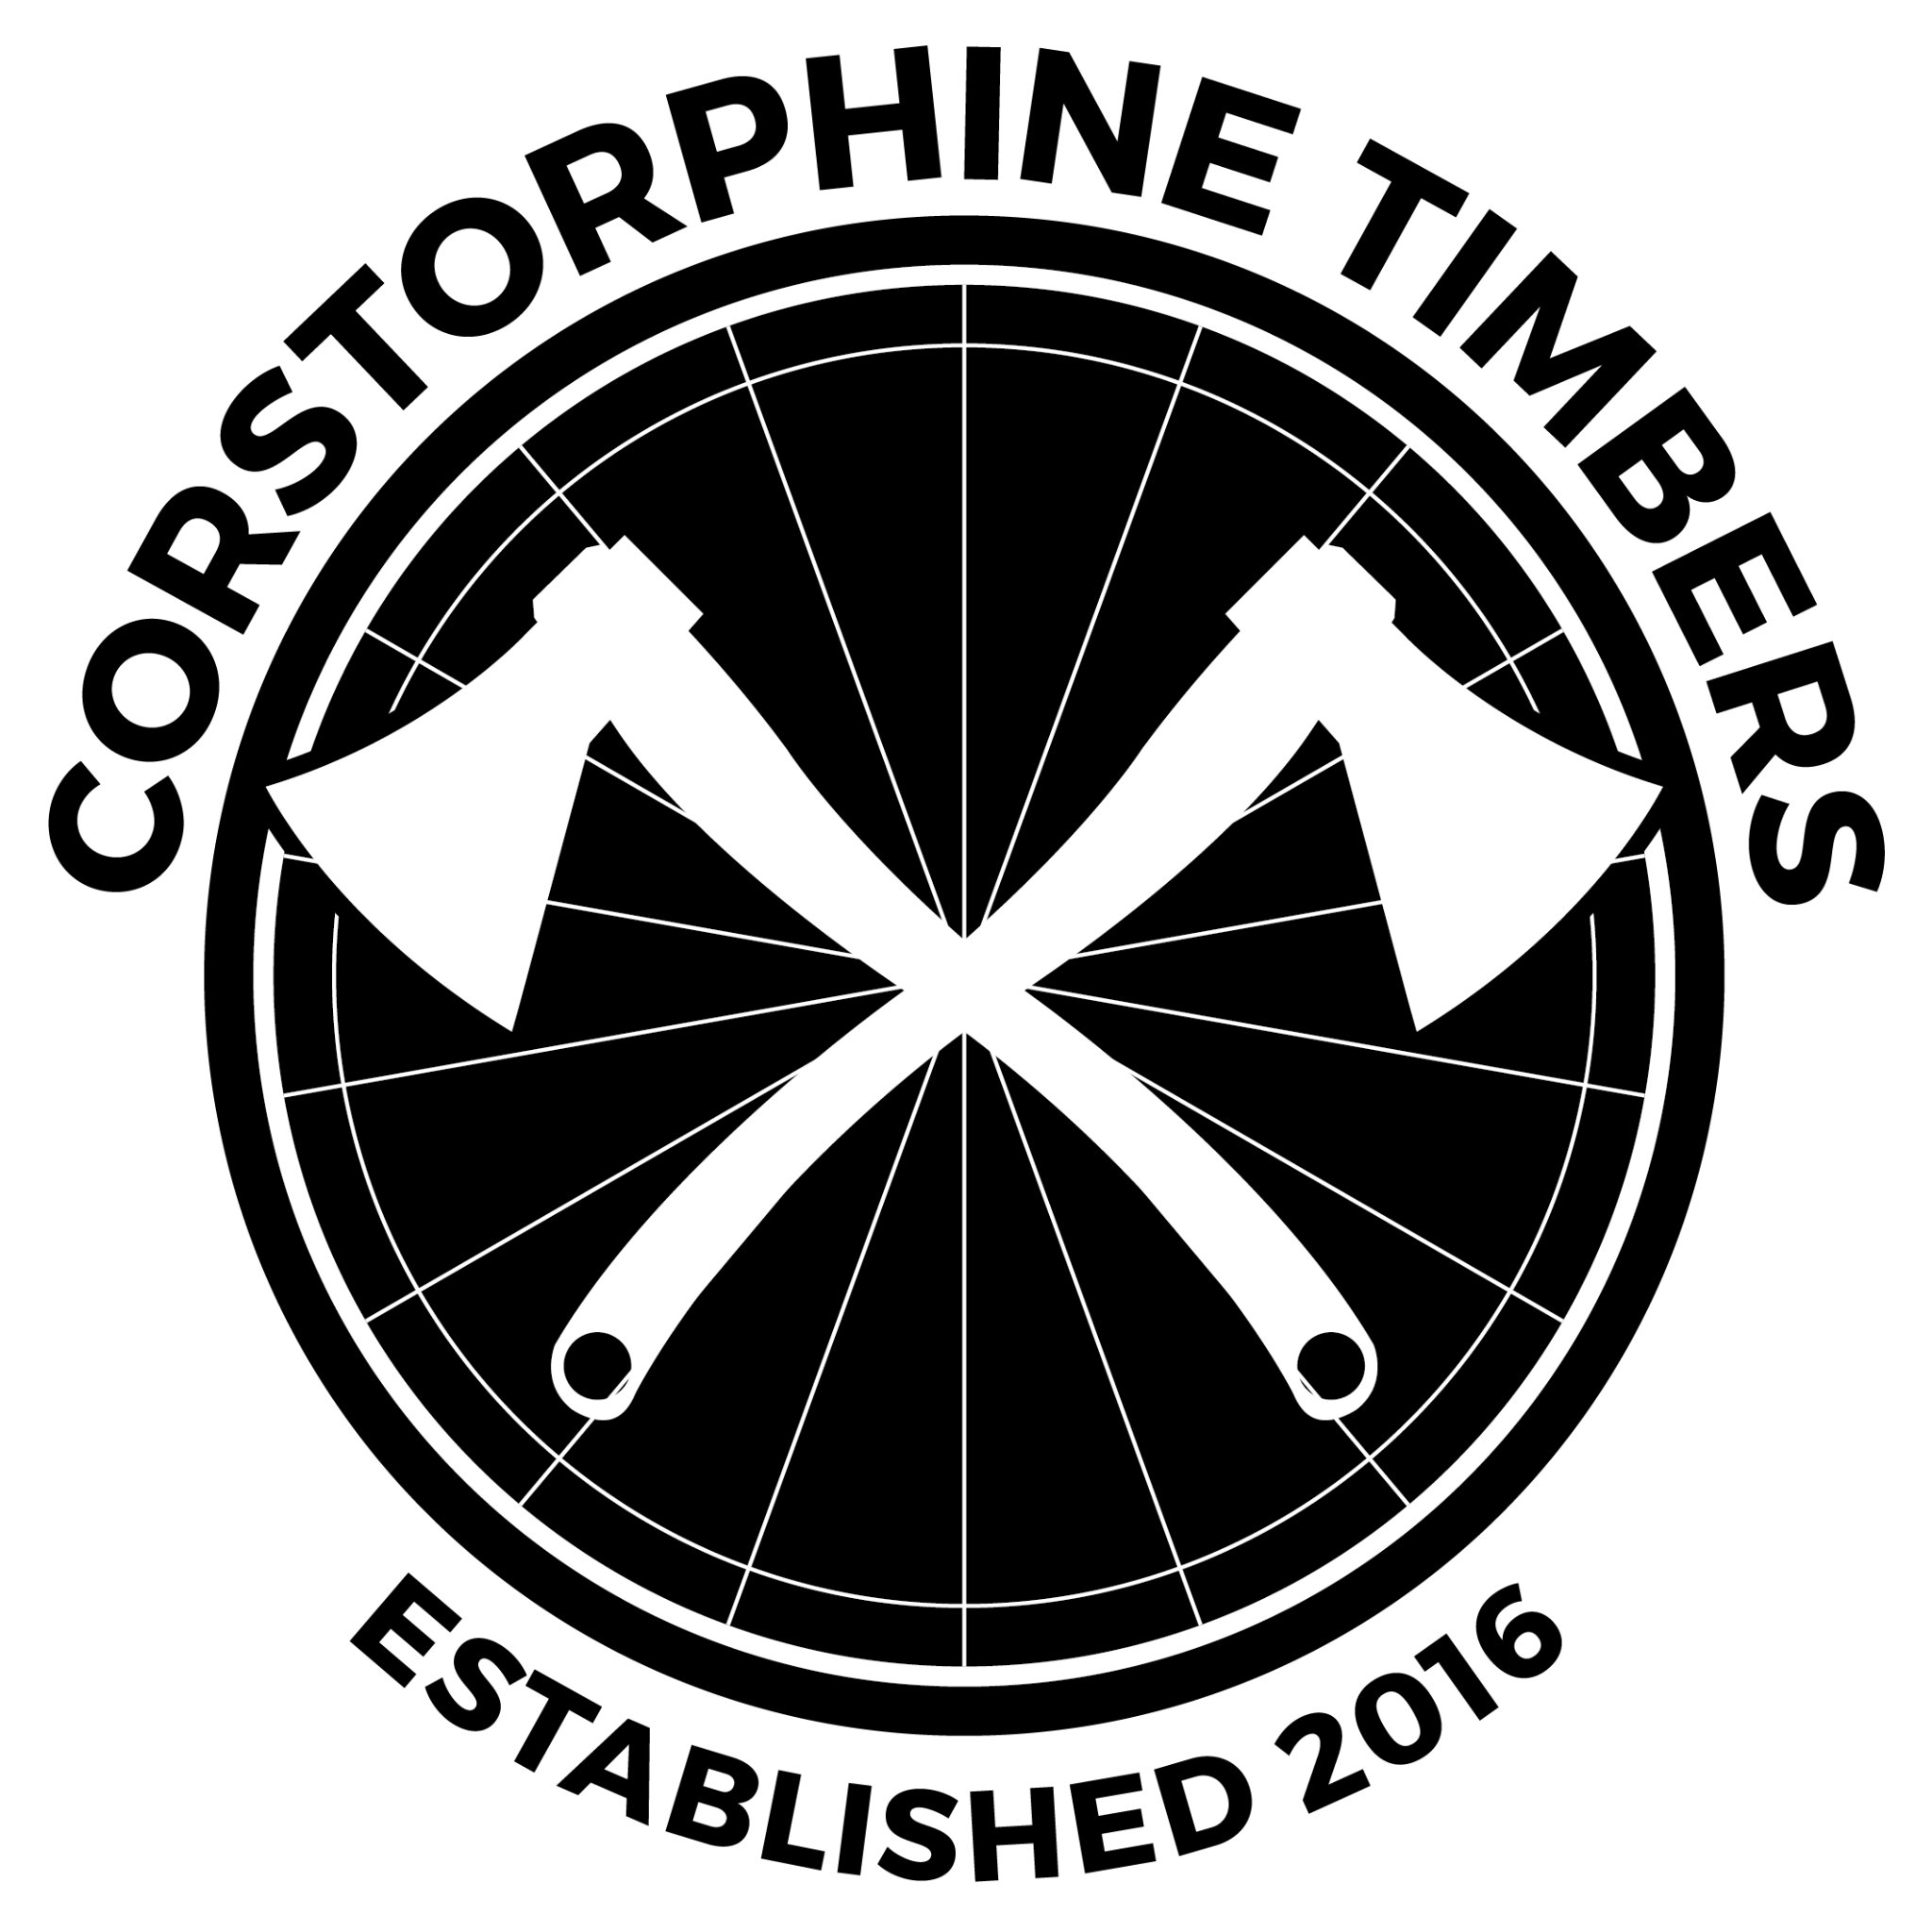 Amateur Football Team from Corstorphine - Edinburgh. Playing in LEAFA Sunday morning division 1. https://t.co/THrpdIvLXy…. Liberum Imperium